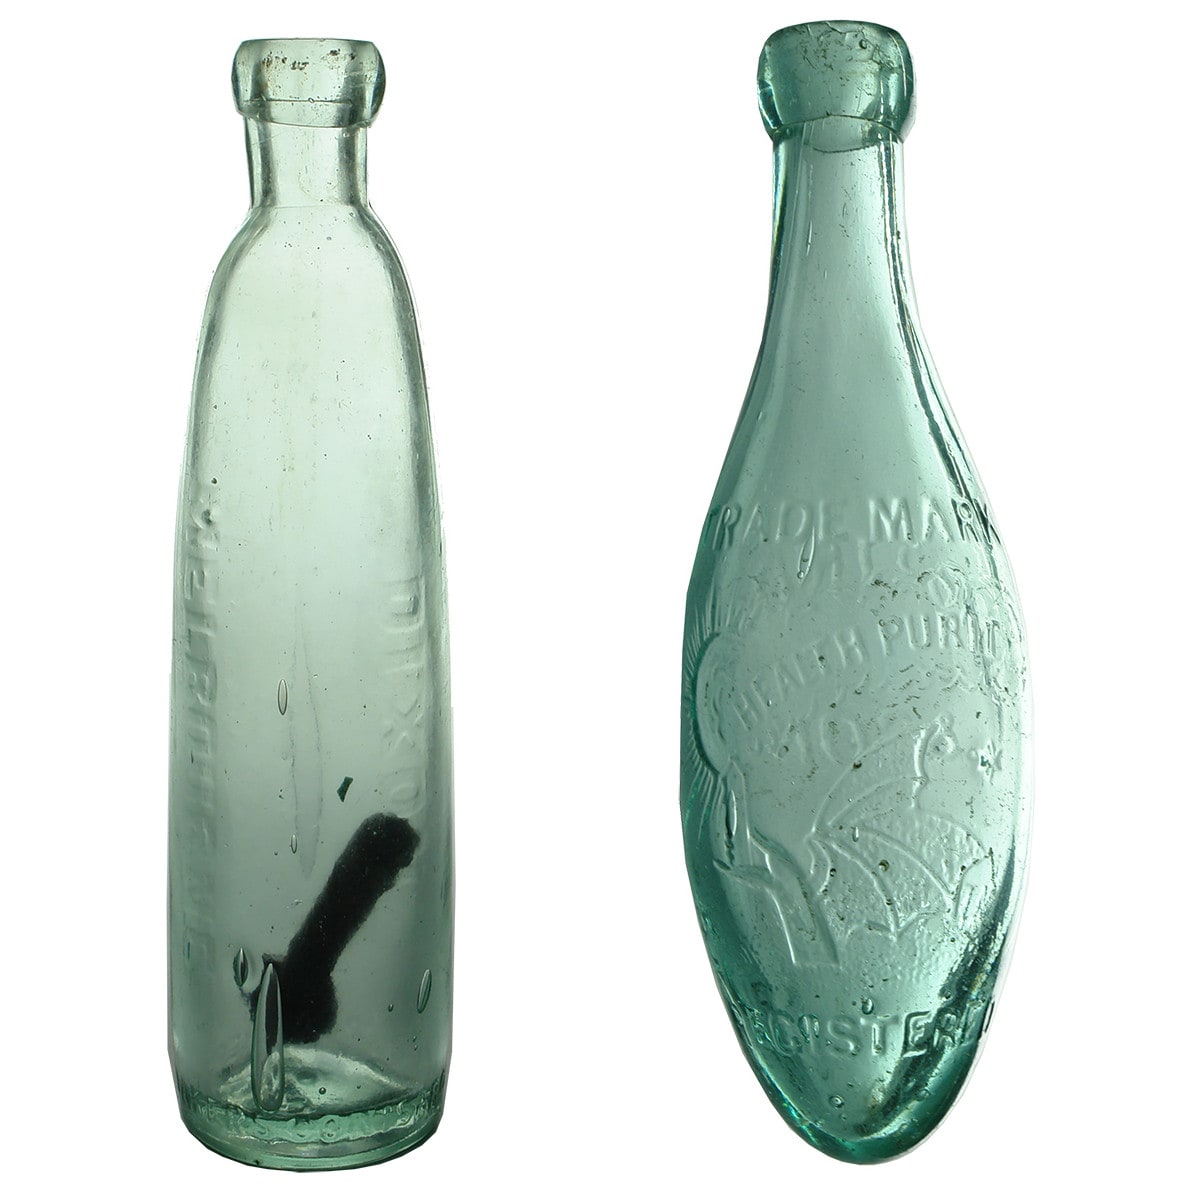 Pair of Melbourne Aerated Water Bottles: Dixon stick bottle and Thos. Trood torpedo. (Victoria)